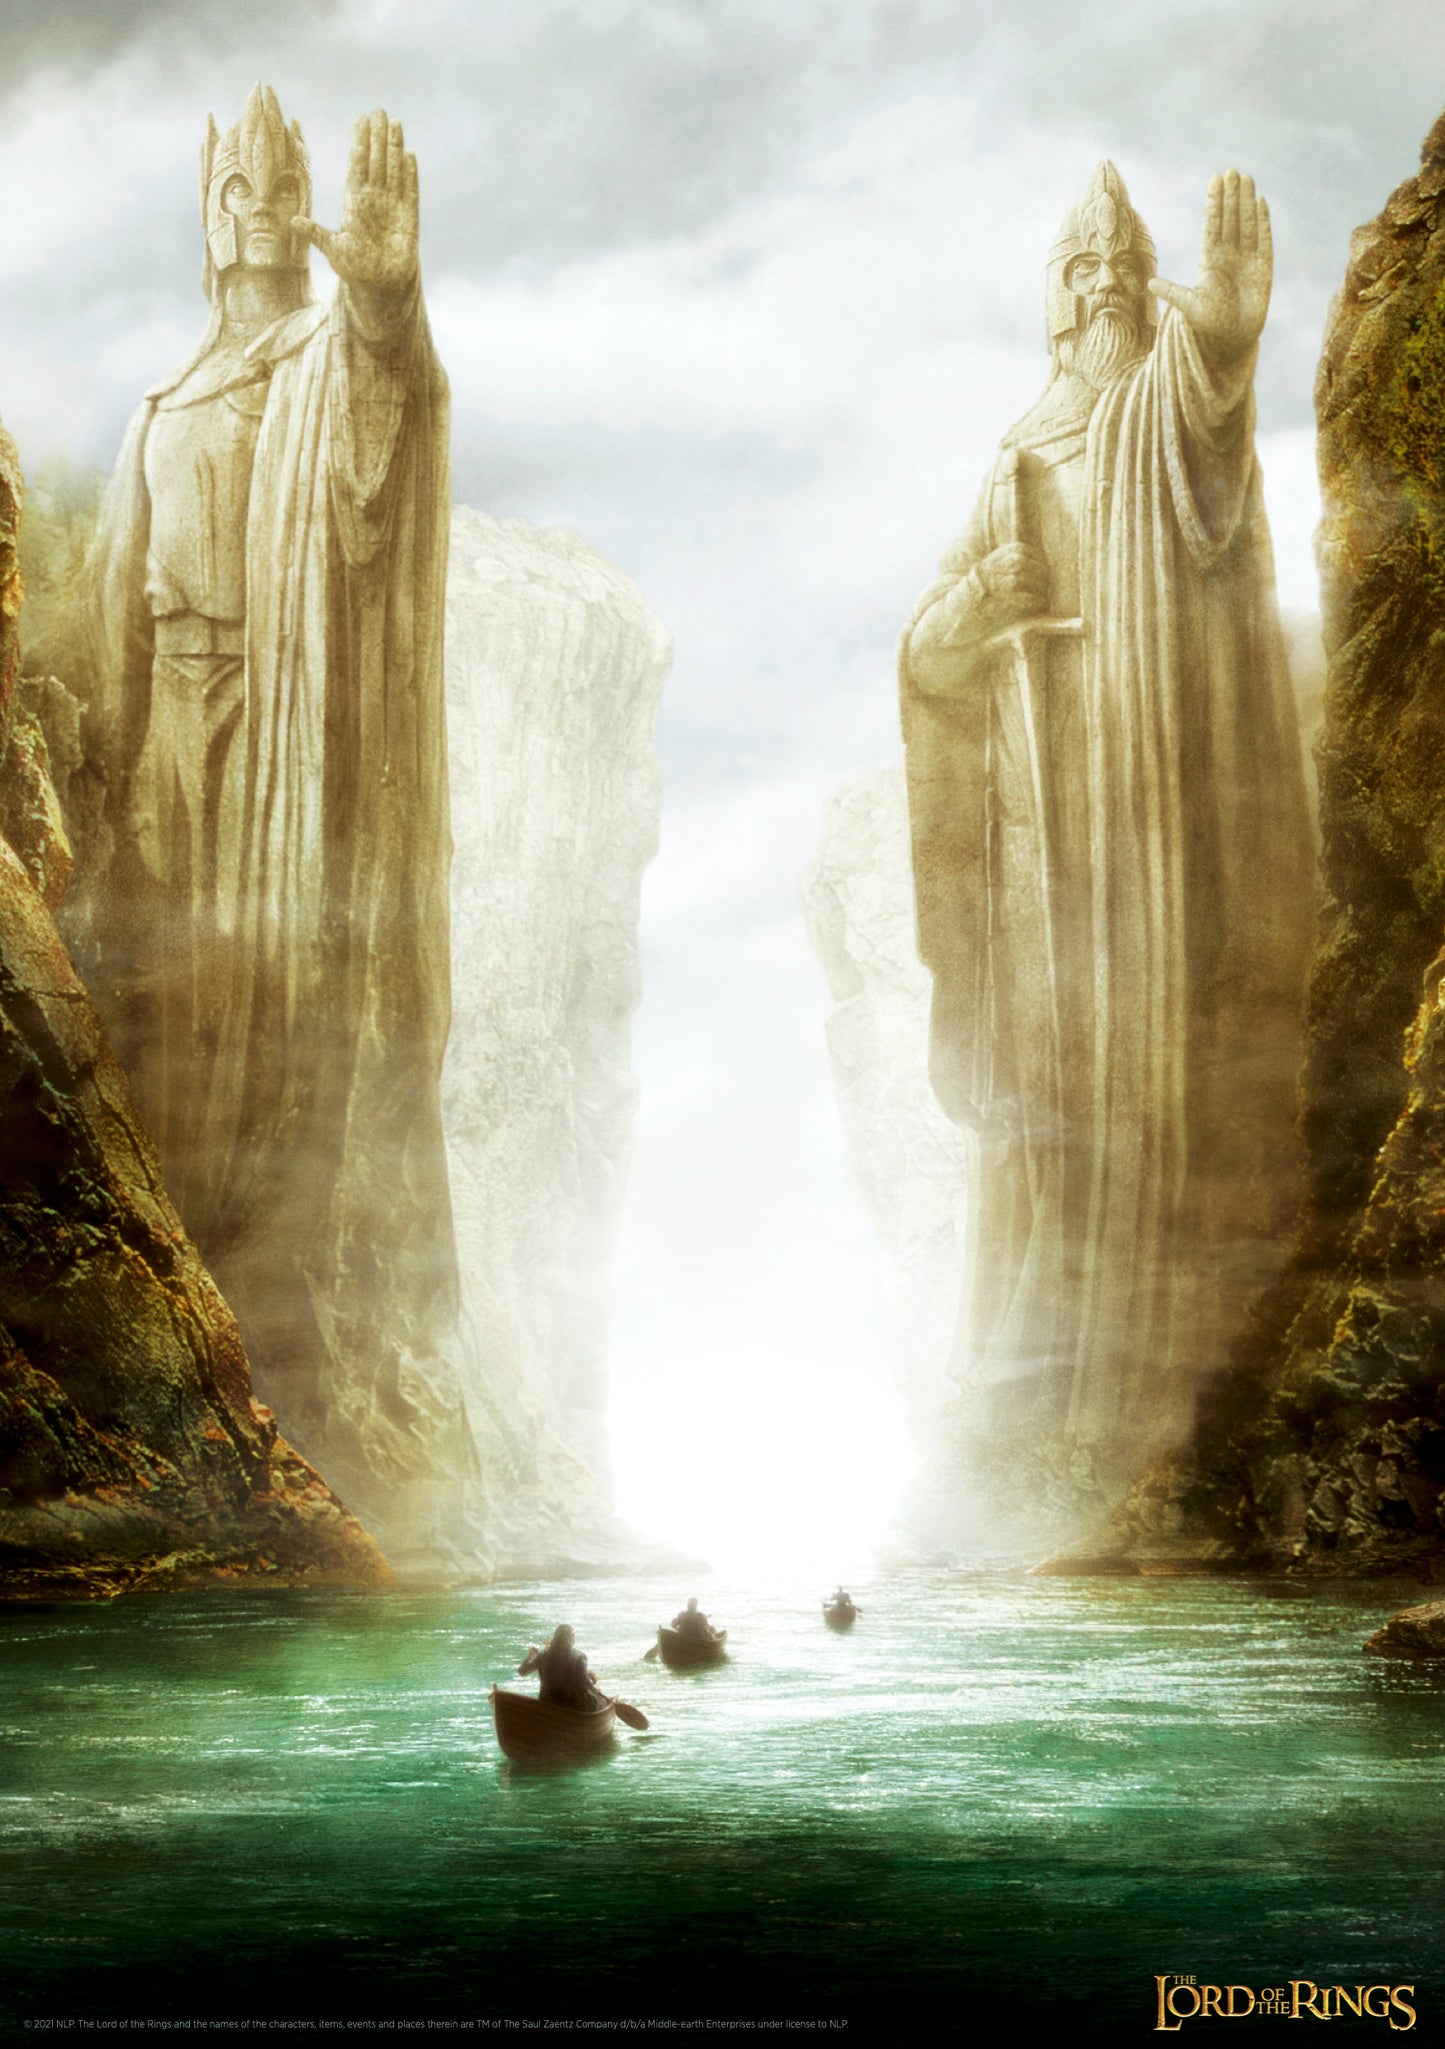 The Lord of the Rings Limited Edition Art Print